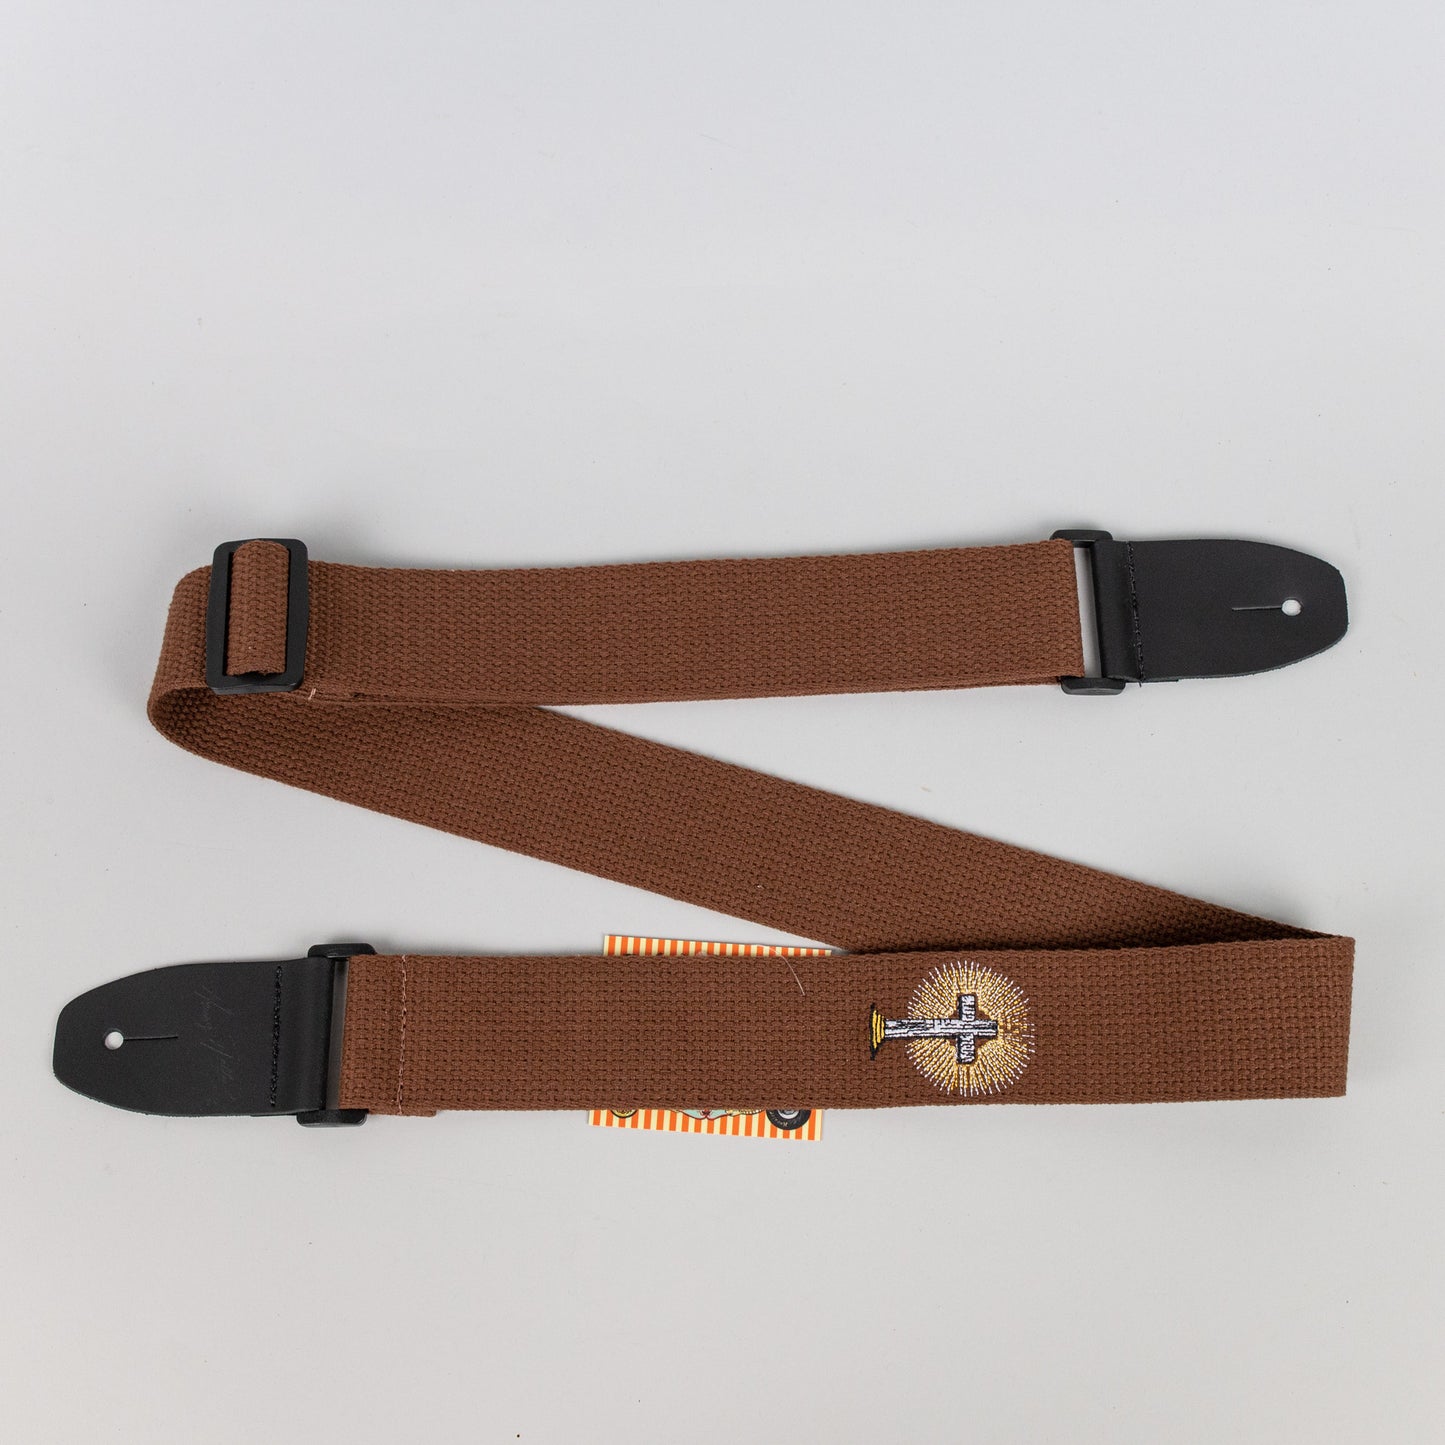 Henry Heller 2" Cotton Guitar Strap with Embroidered Design, Brown